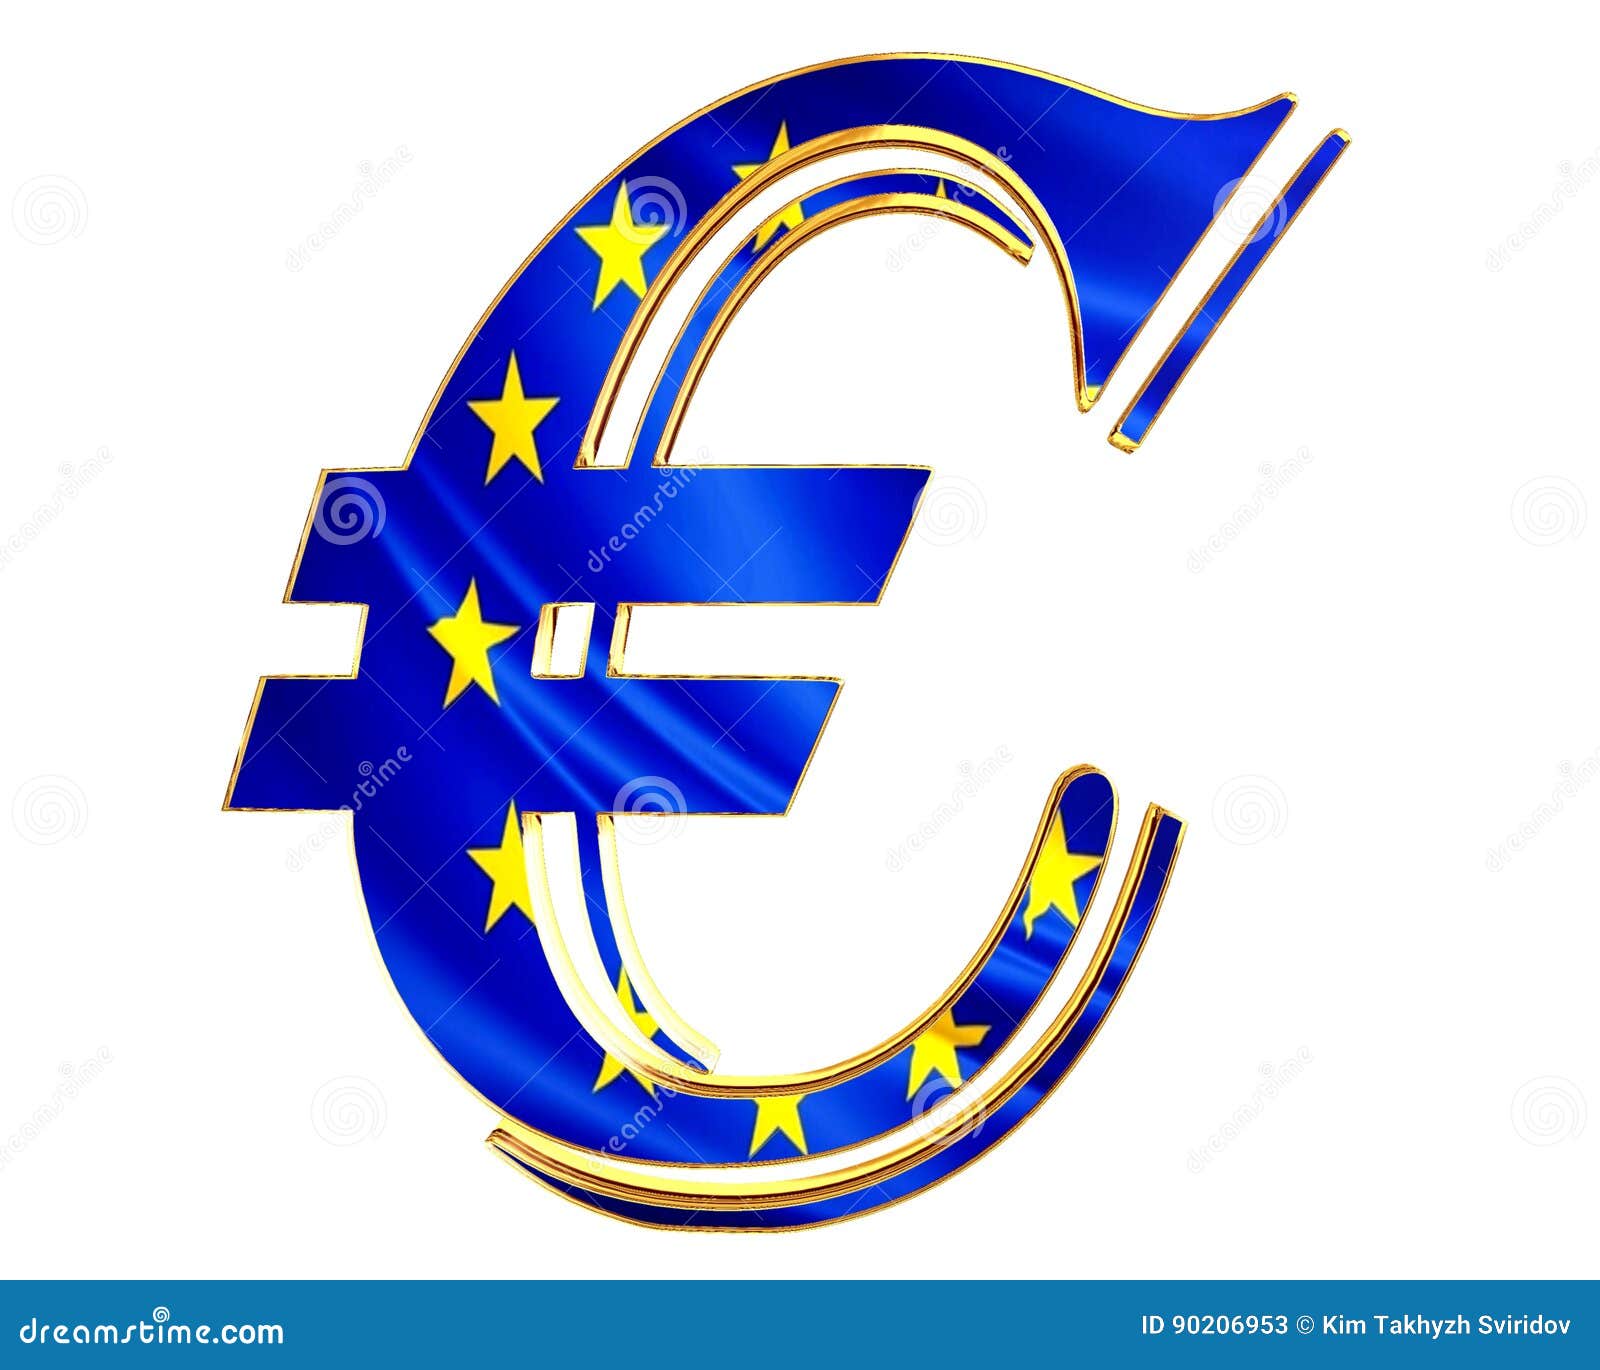 3d Render Of Gold Euro Sign On Colord Blue Background, Gold 1 Euro